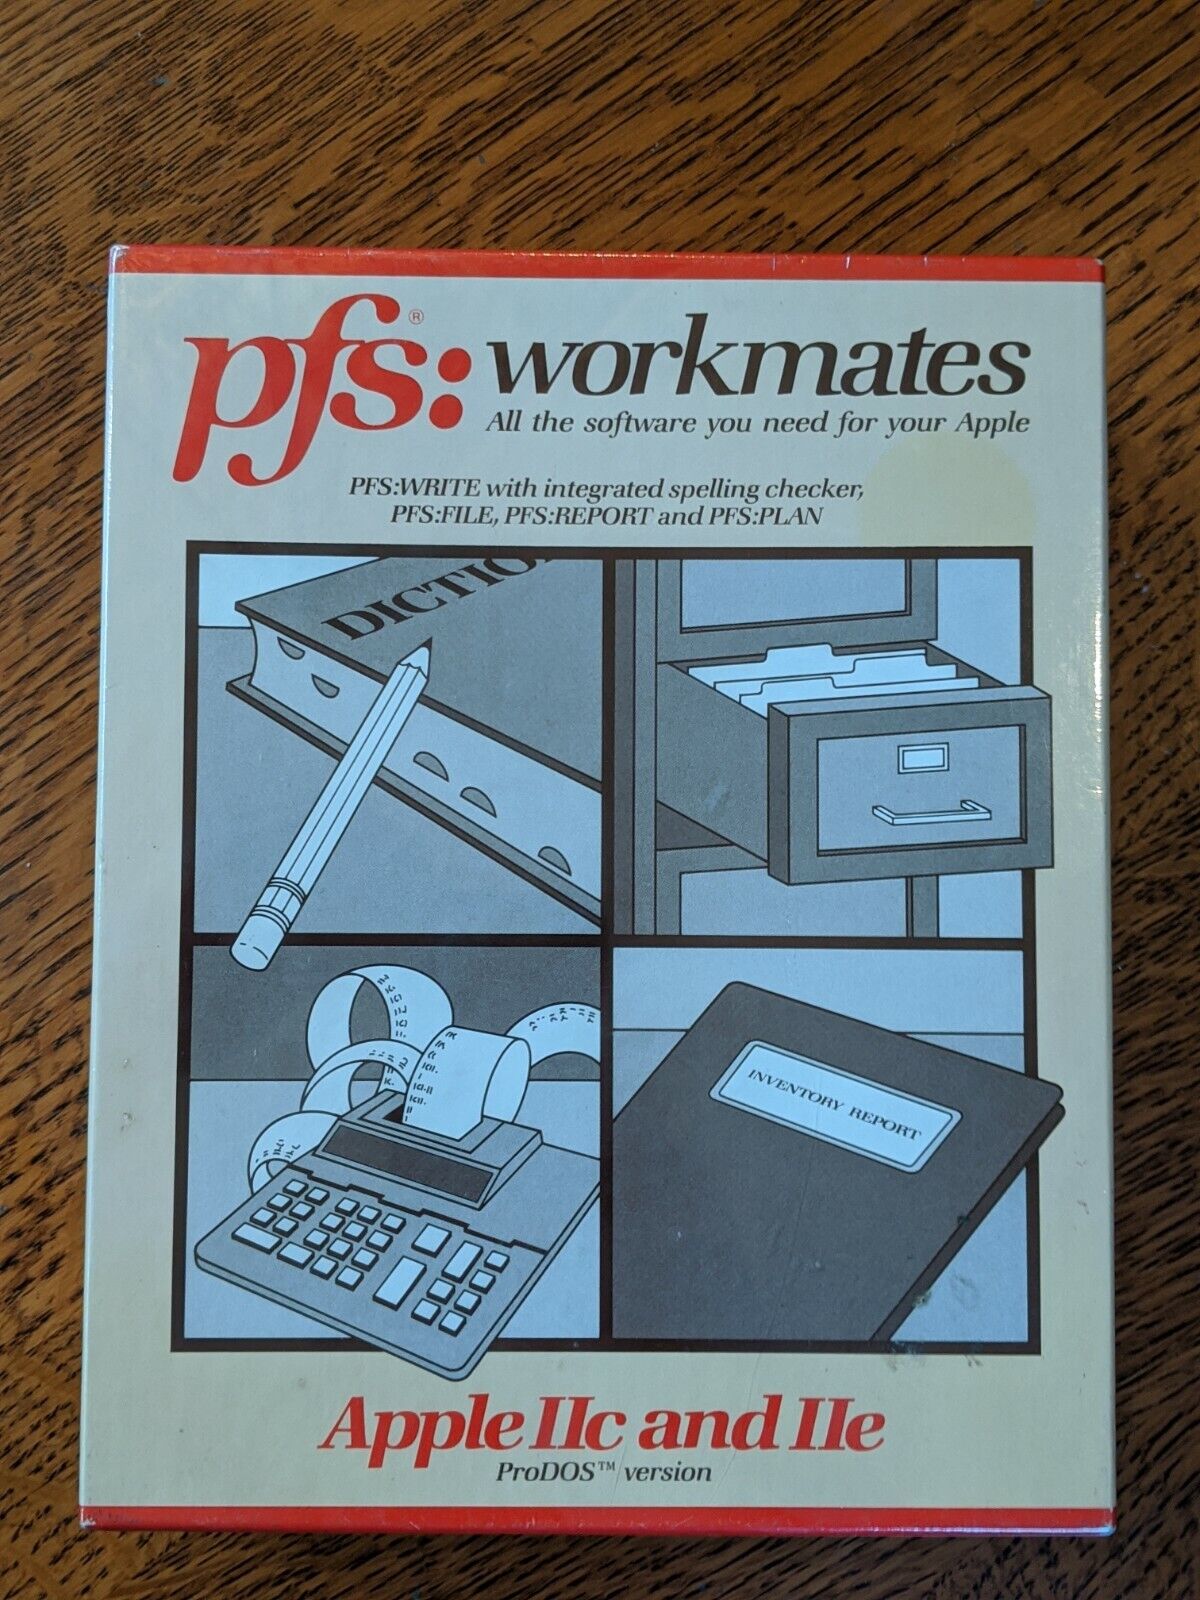 Vintage 1980s New Sealed PFS: Workmates Software for Apple IIc/IIe ProDOS 